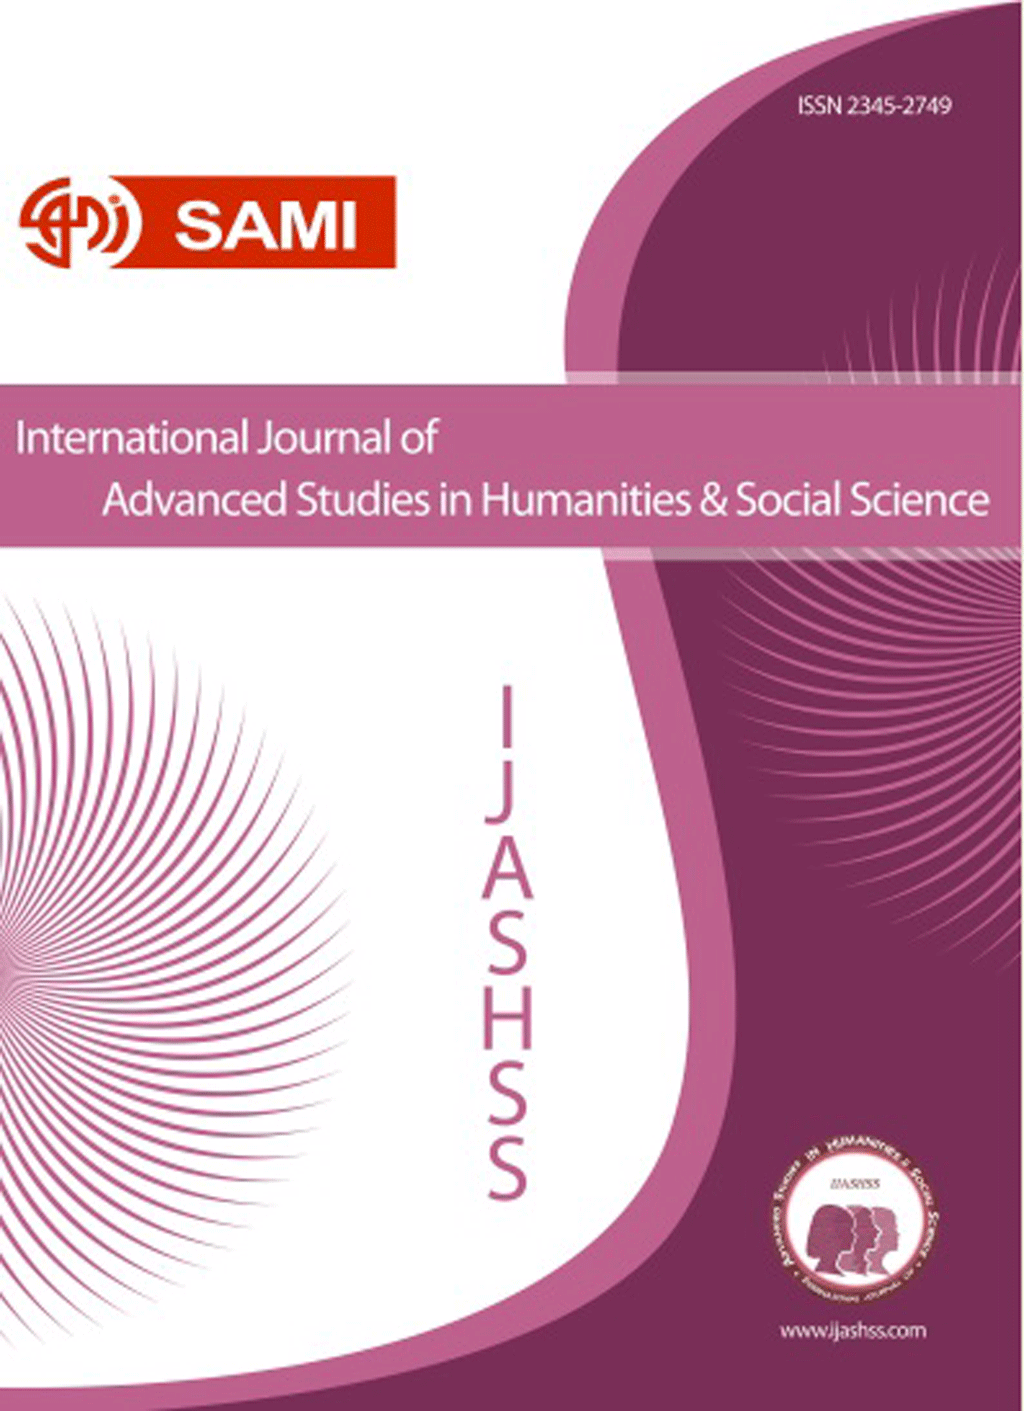 International Journal of Advanced Studies in Humanities and Social Science - January 2014, Volume 3 -  Issue 1